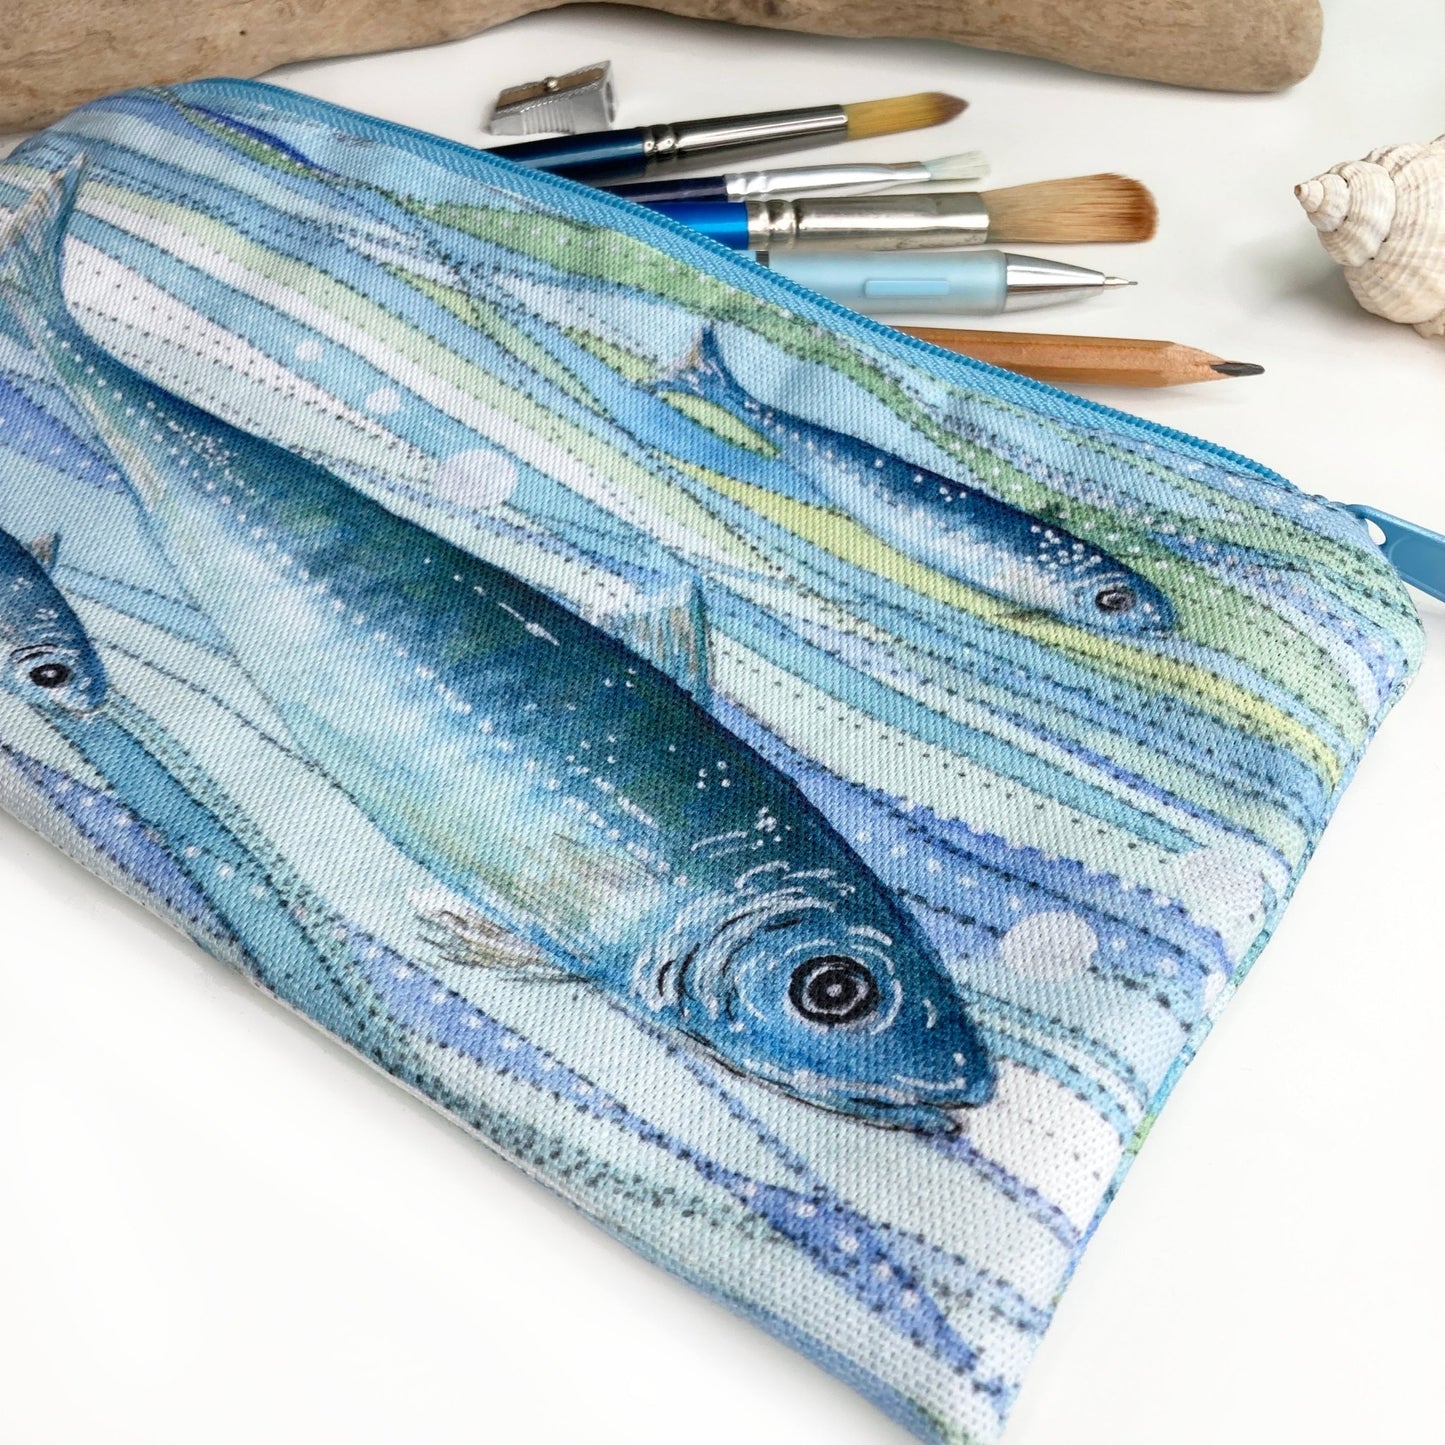 Make Up Bag or Pencil Case - Handmade Nautical Print with Fish - East Neuk Beach Crafts